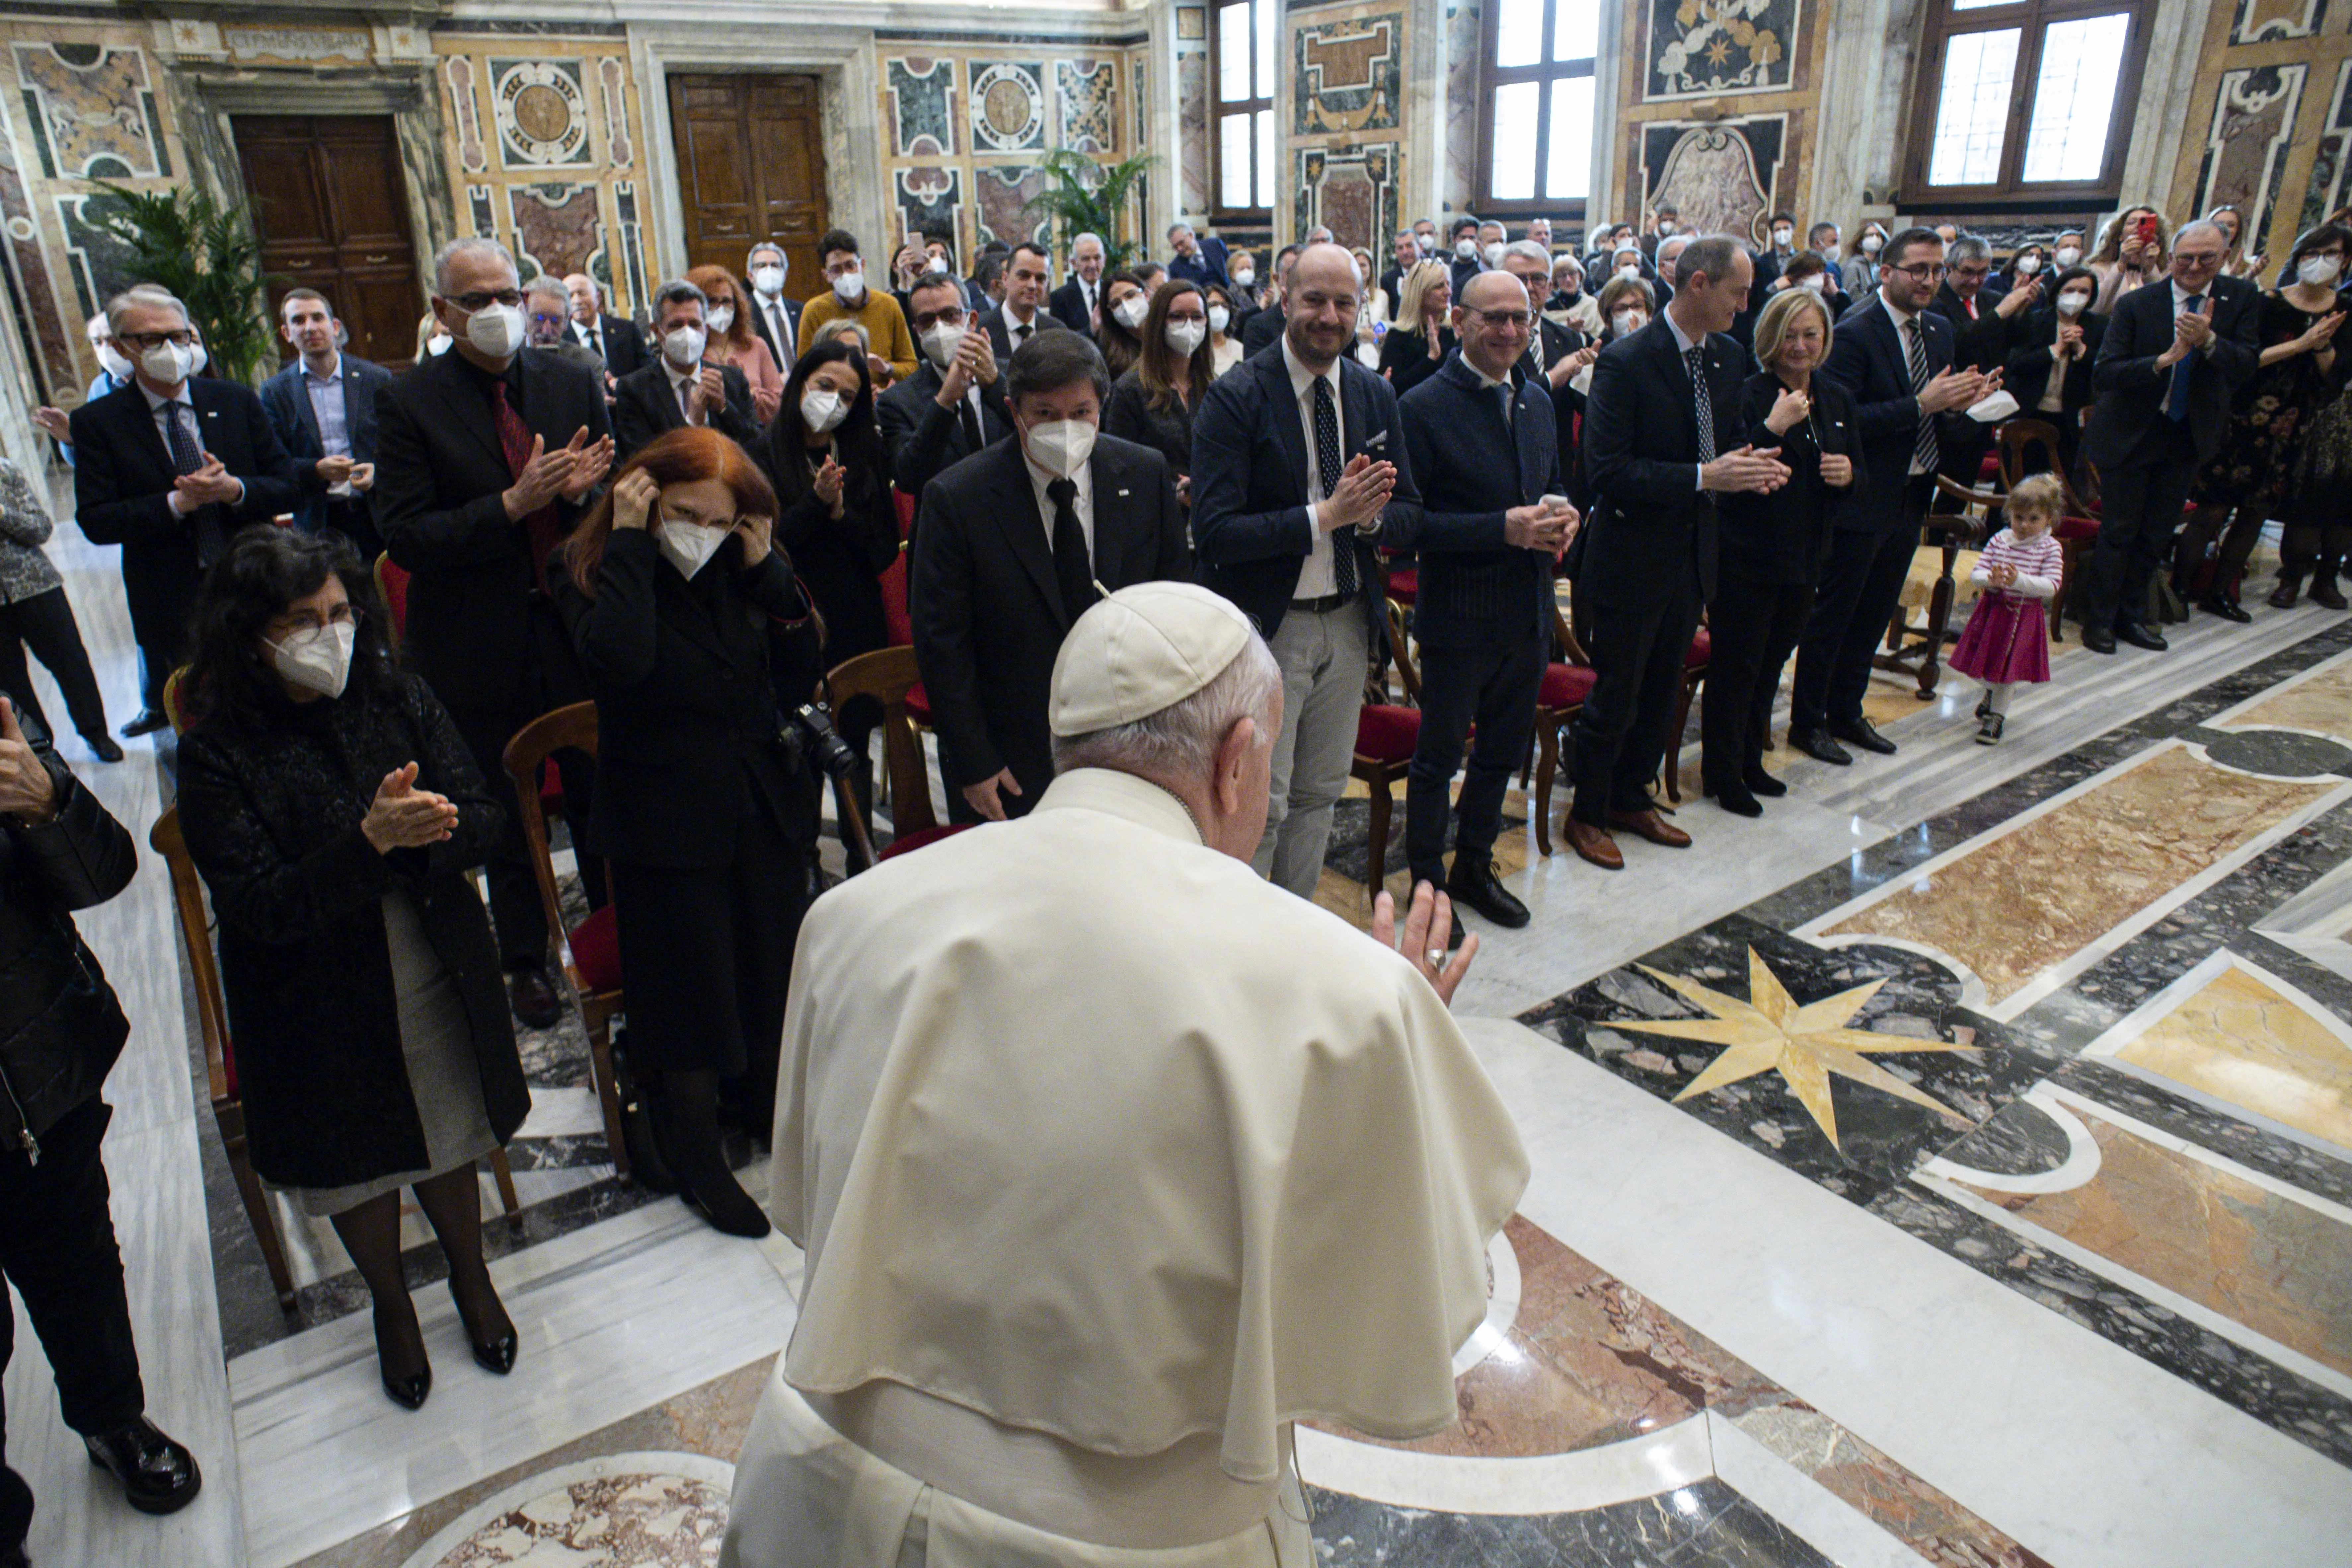 Pope Francis welcomes members of the Italian Association of Leather Chemists during an audience in the Clementine Hall of the Vatican Apostolic Palace on January 29, 2022. Vatican Media